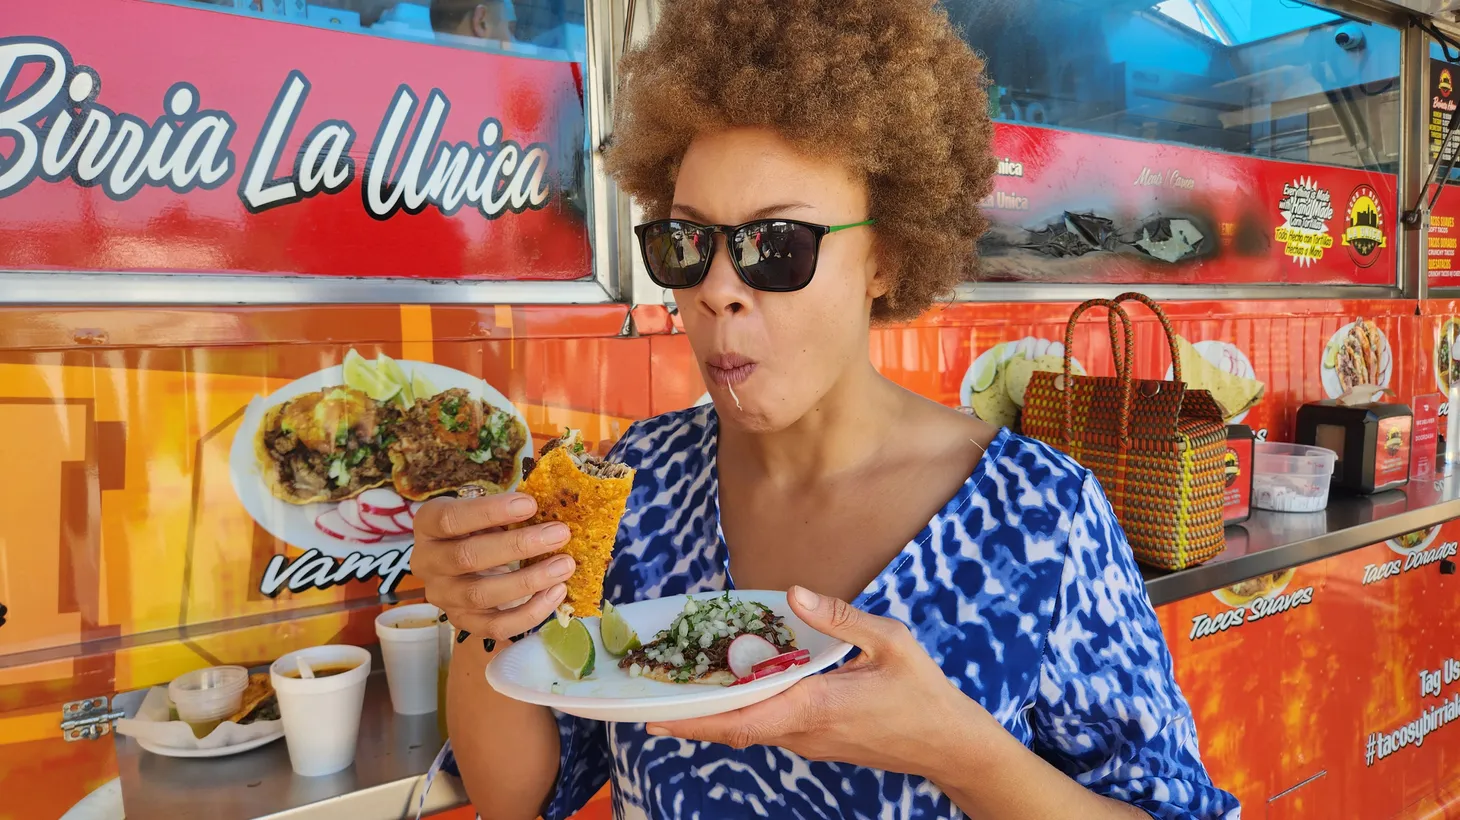 Mona Holmes says her expat niece Christine (pictured) is compelled by the diversity and variety of food, especially Mexican cuisine, in Los Angeles.